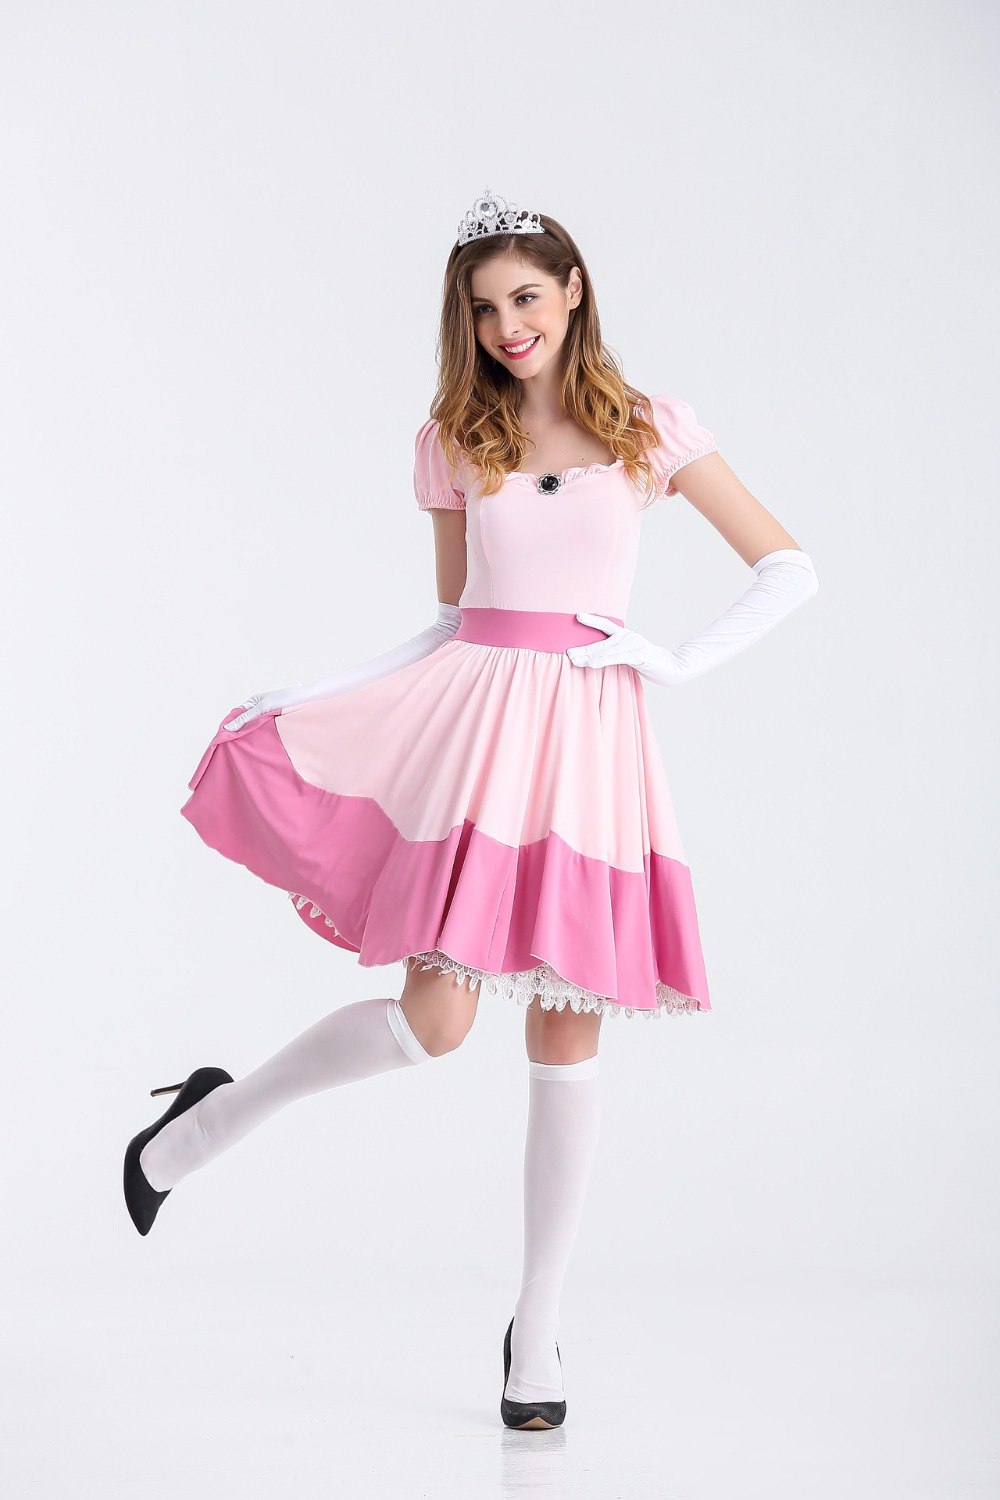 Halloween Pink Peach Princess Super Mario Costume Women For Adults Women Girl Super Mario Bros Cosplay Party Dress Sexy Cosplay